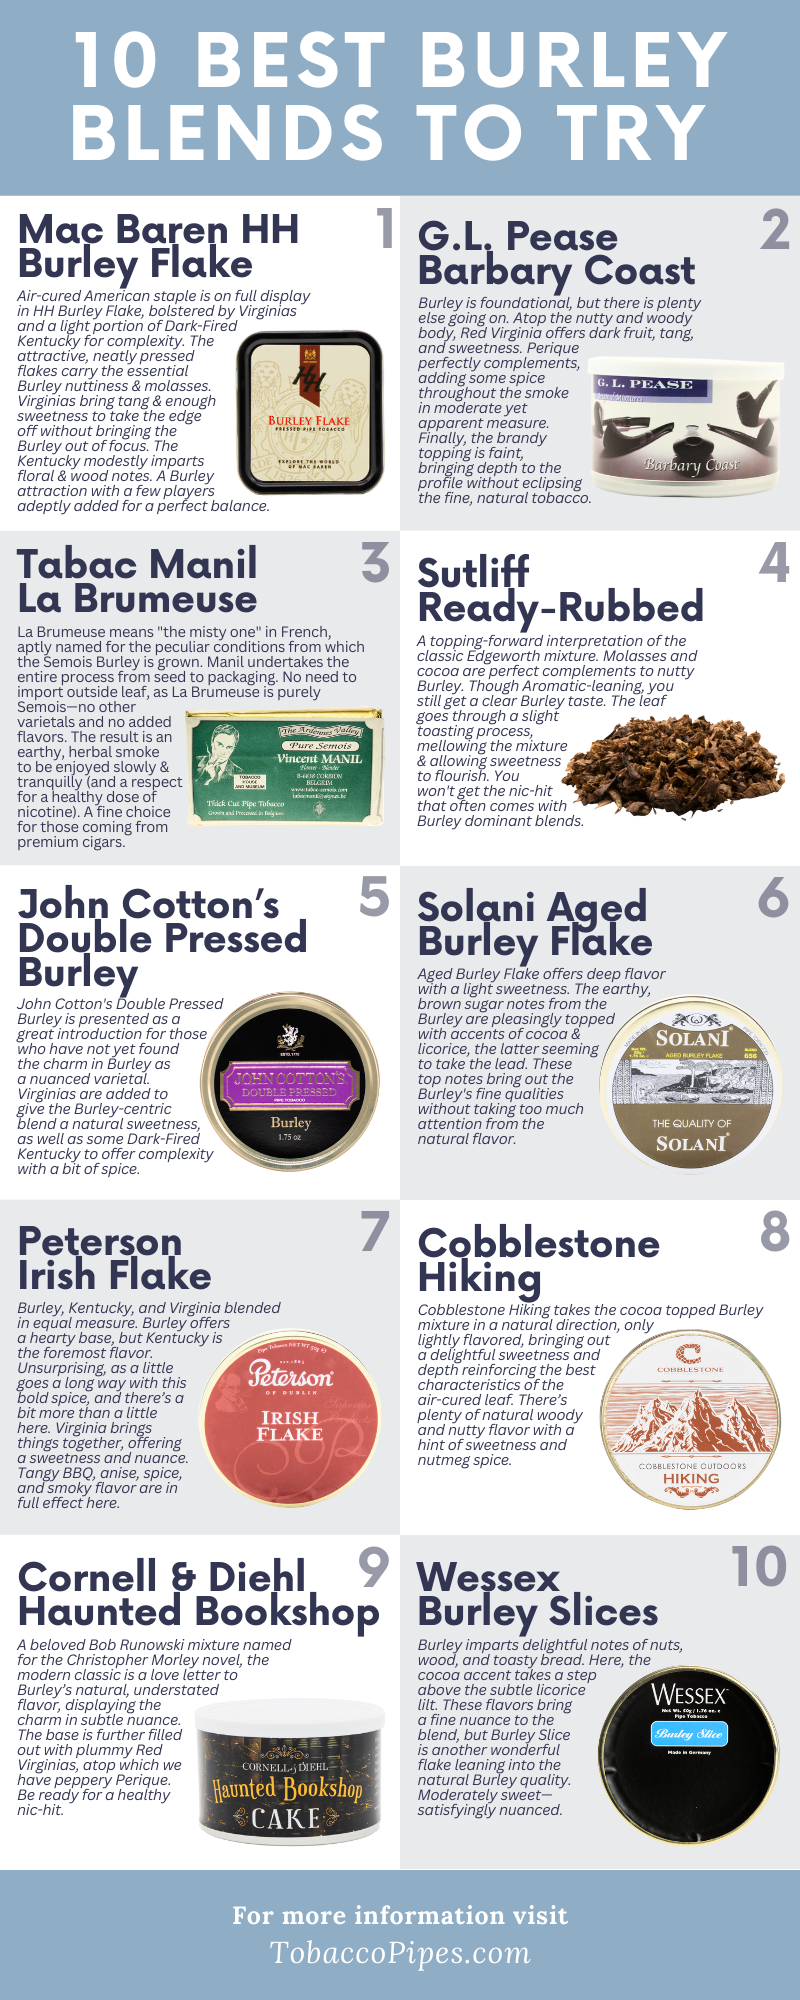 10 of the Best Burley Blends to Try